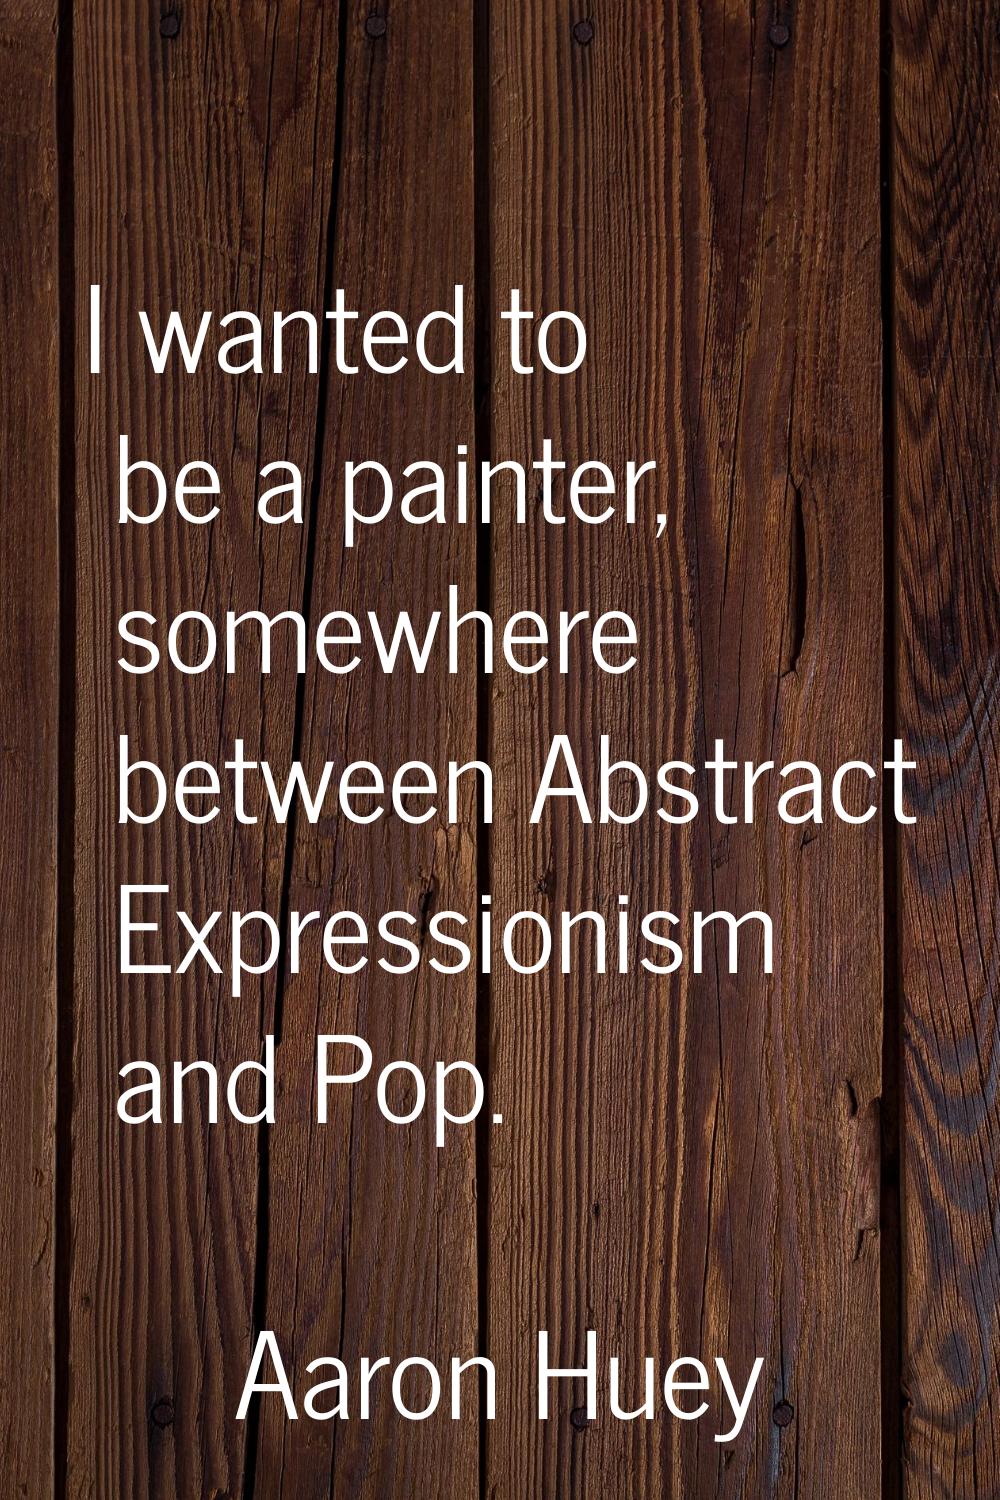 I wanted to be a painter, somewhere between Abstract Expressionism and Pop.